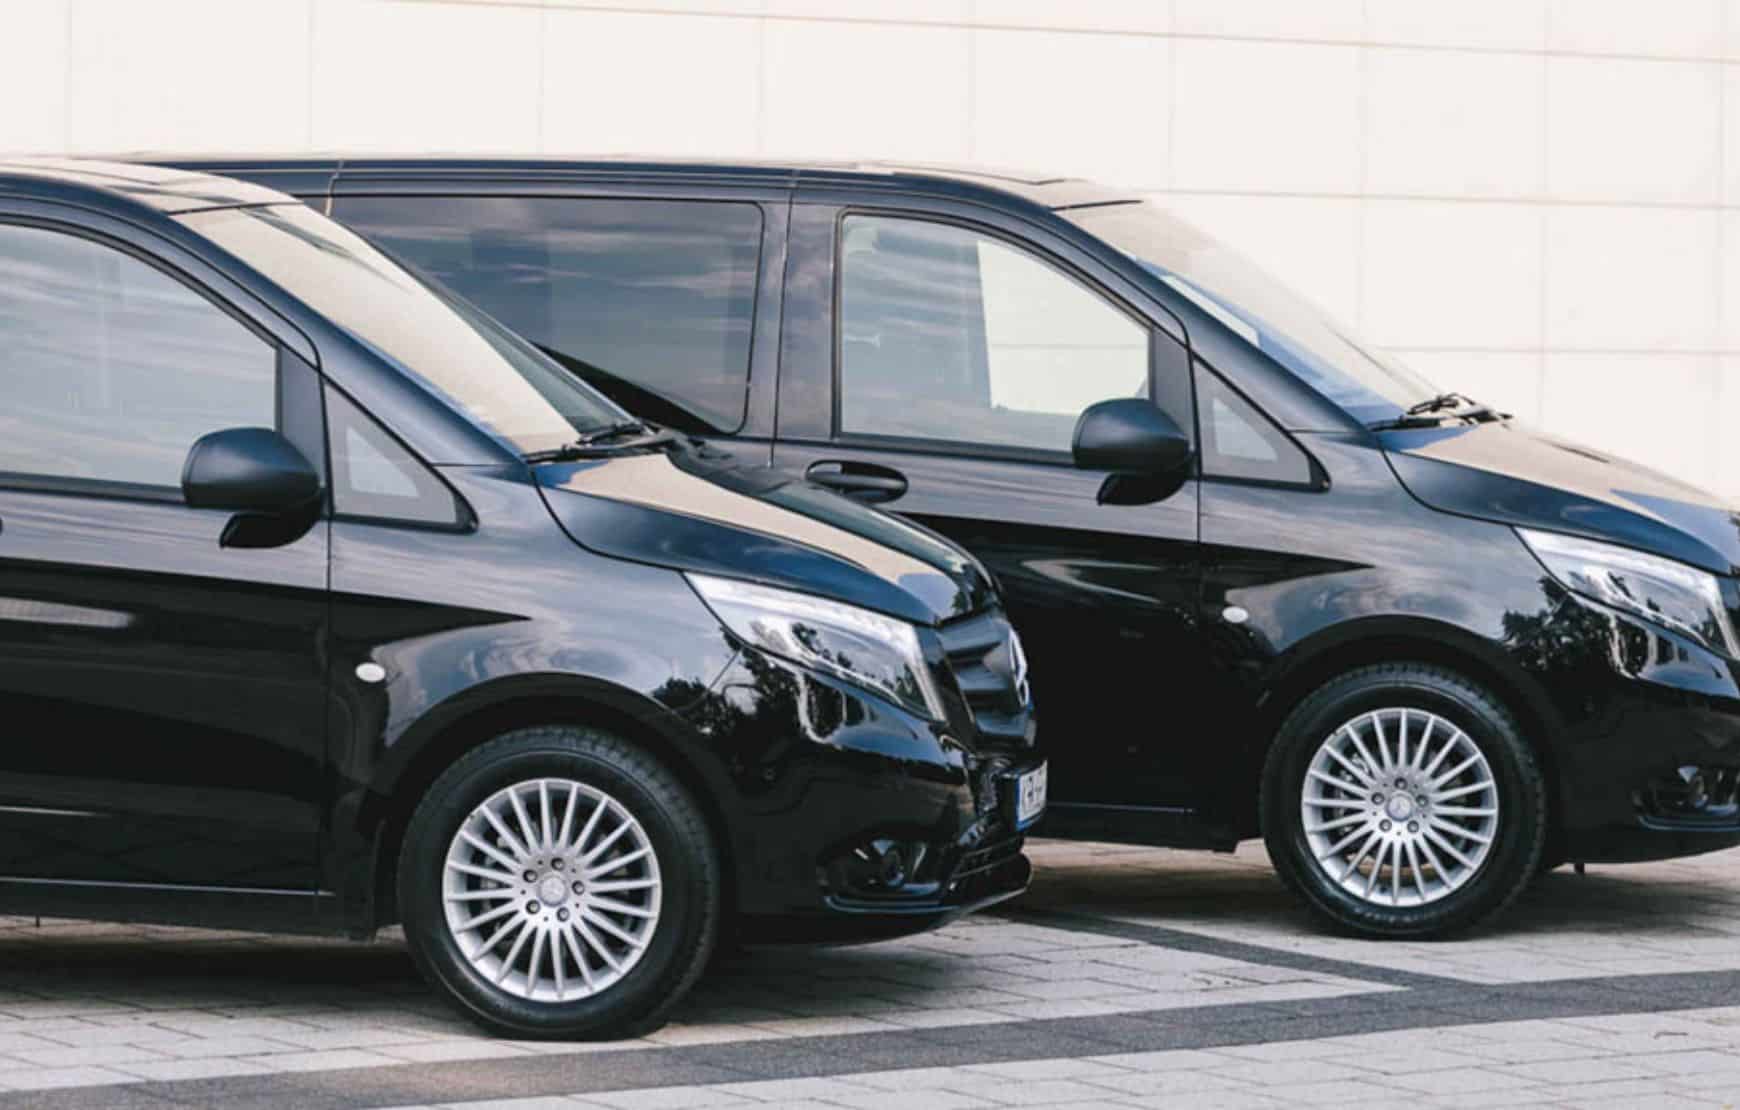 Mercedes v-class vehicles at our Antalya Airport Transfer